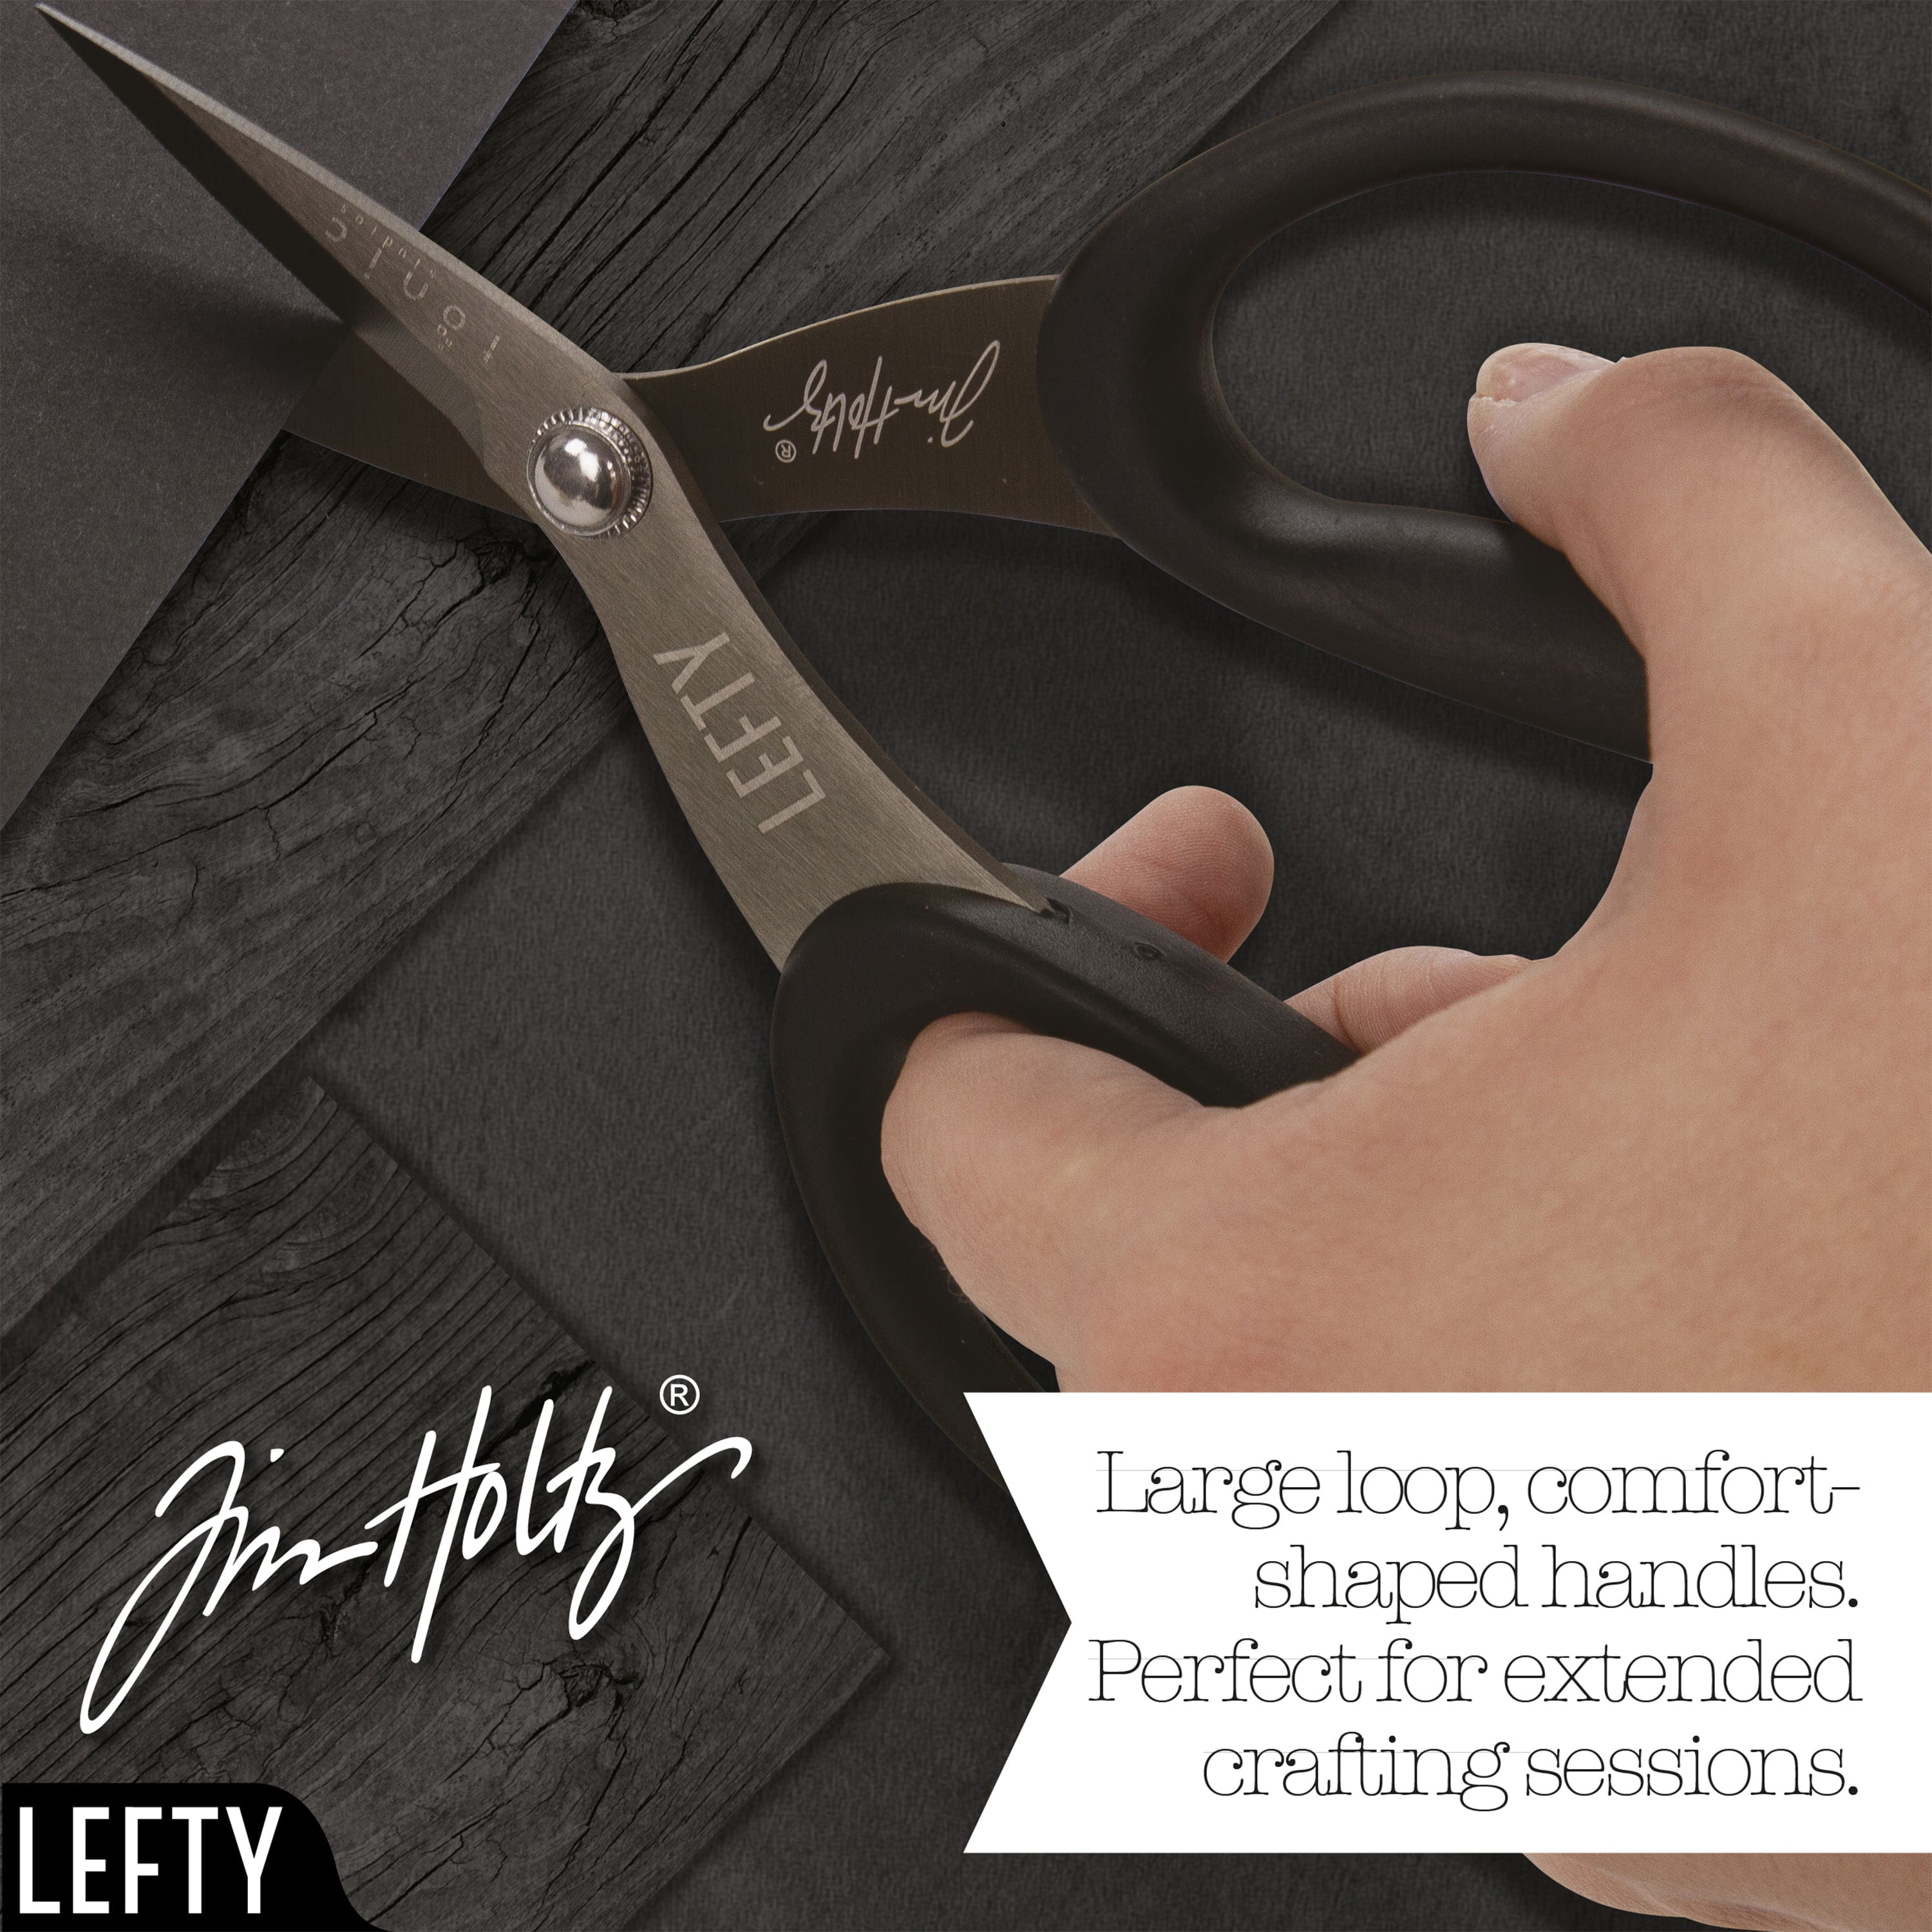  Lefty's True Left-Handed Scissors for General Purpose Use, 2  Sizes Included